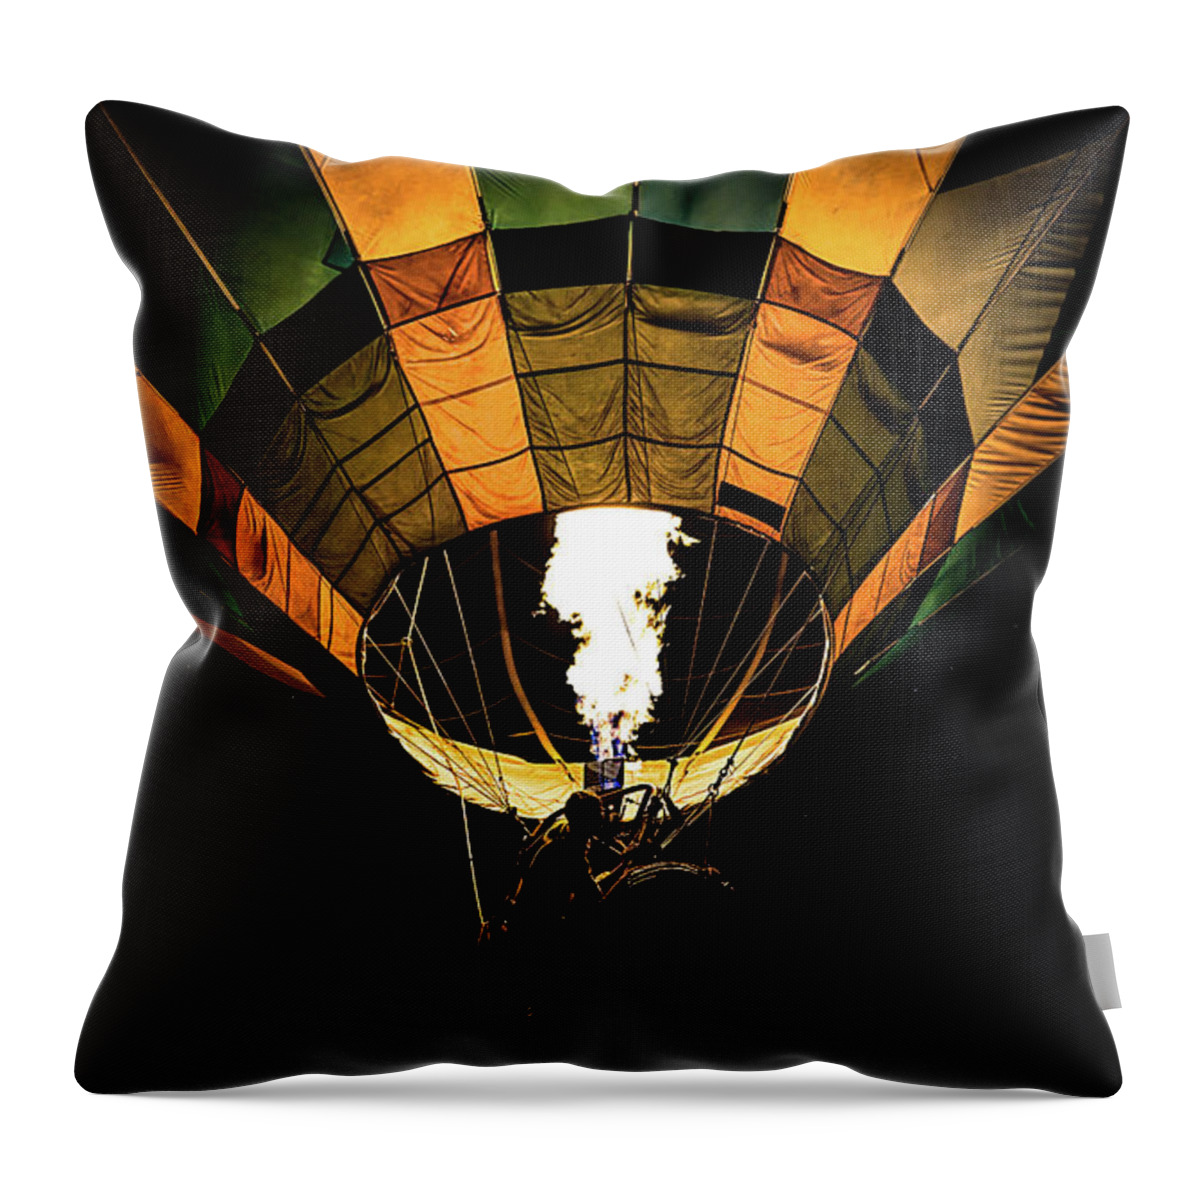 Flame Throw Pillow featuring the photograph Flame On Hot Air Balloon by Bob Orsillo